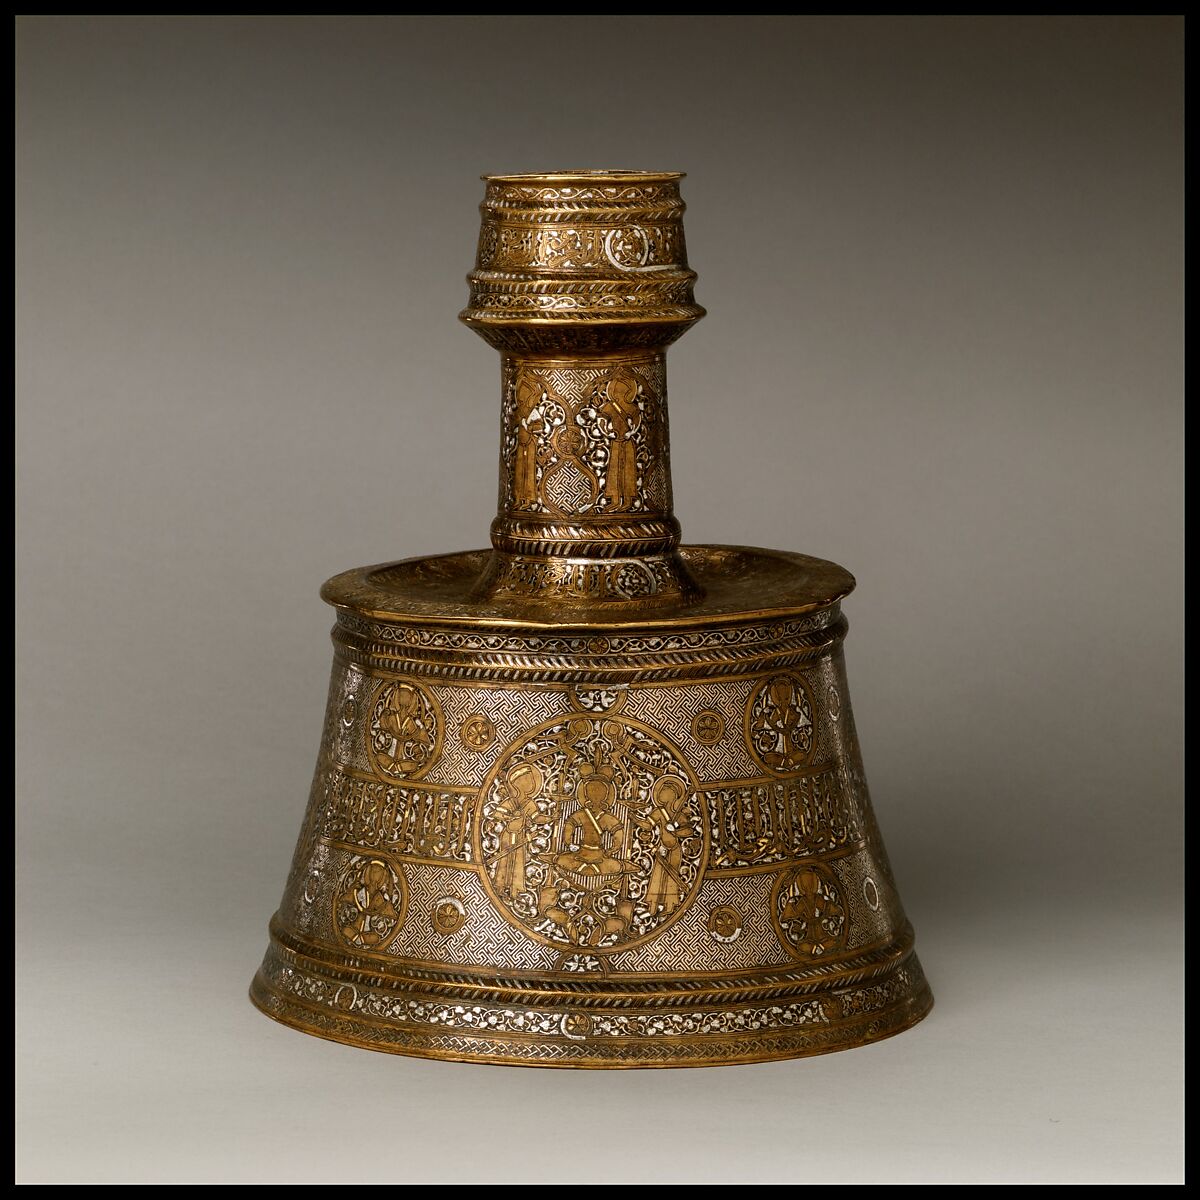 Candlestick, Brass; inlaid with silver, gold, and black compound